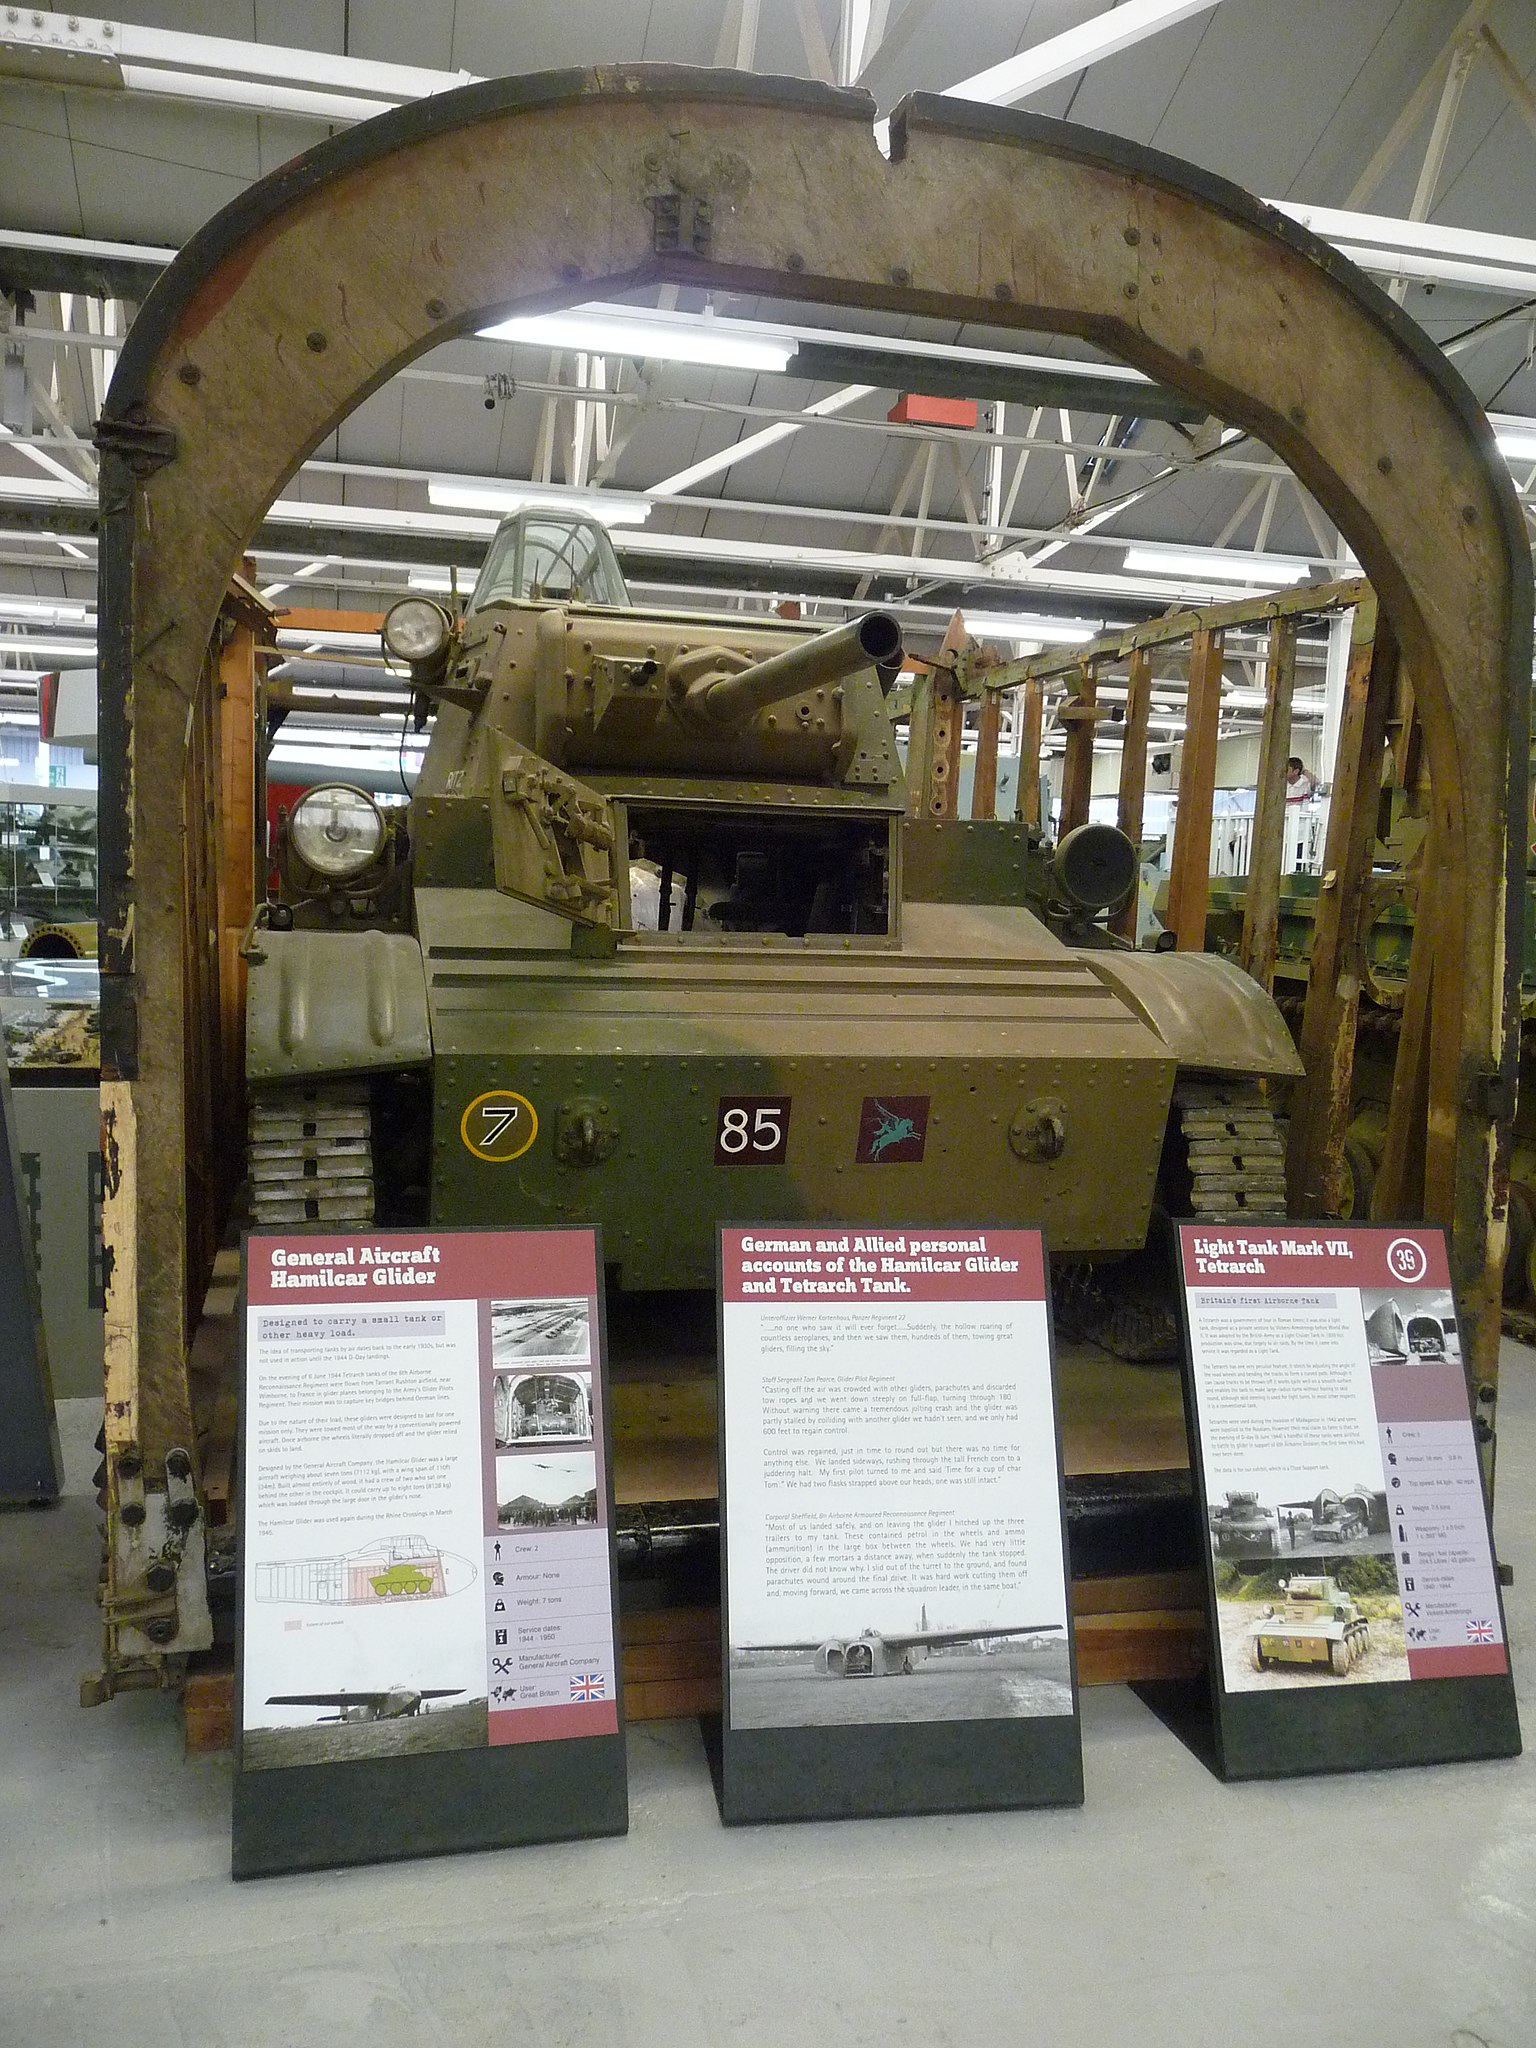 A Tetrarch tank and a section of Hamilcar glider fuselage, Bovington Tank Museum